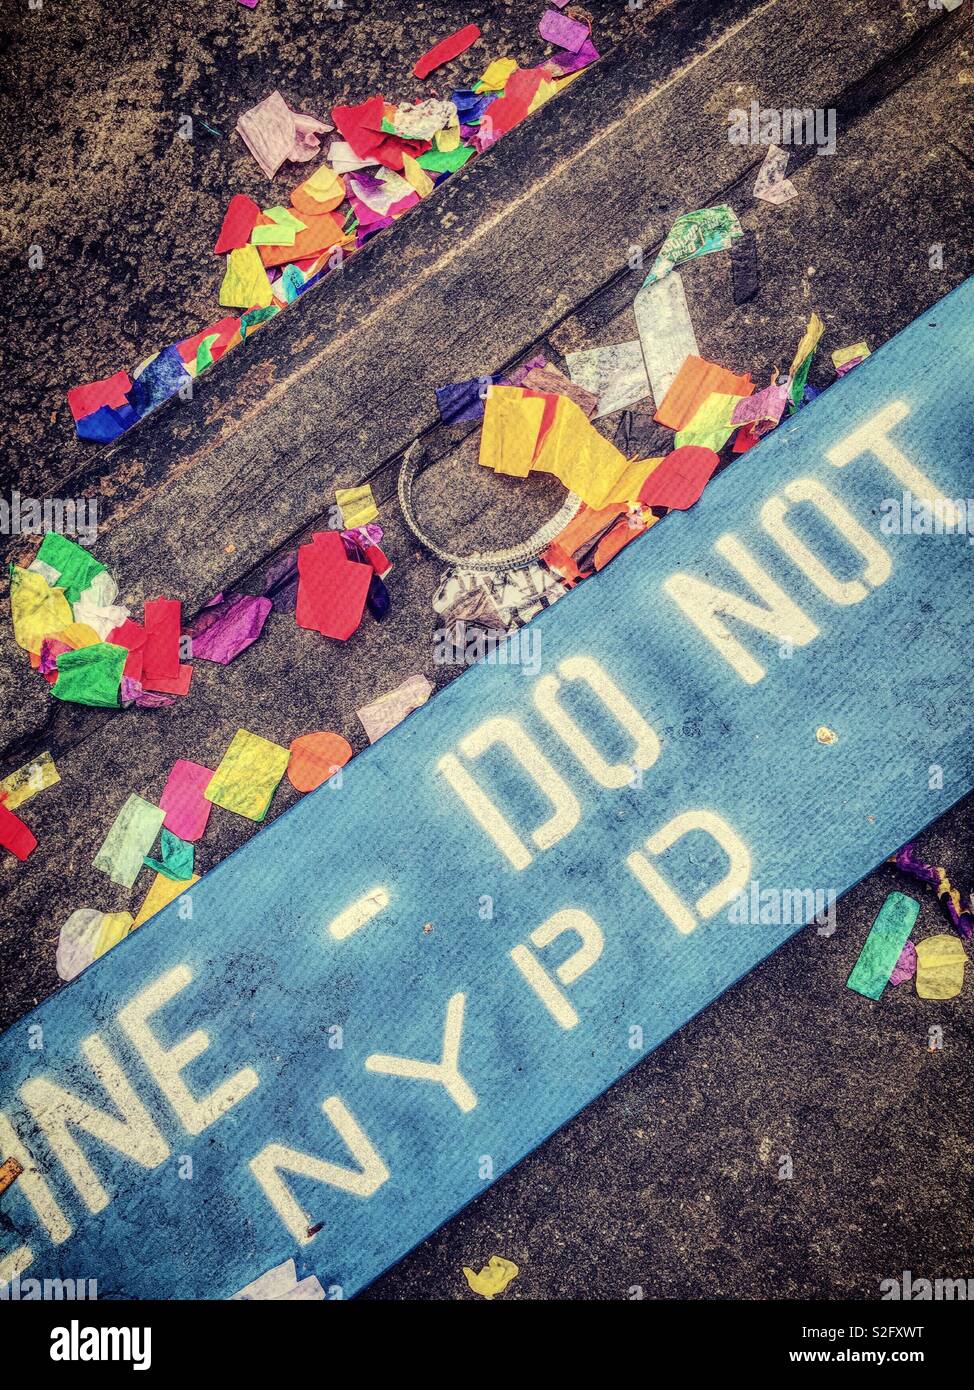 Confetti from Times Square new years eve celebration 2019 with NYPD wooden barrier Stock Photo